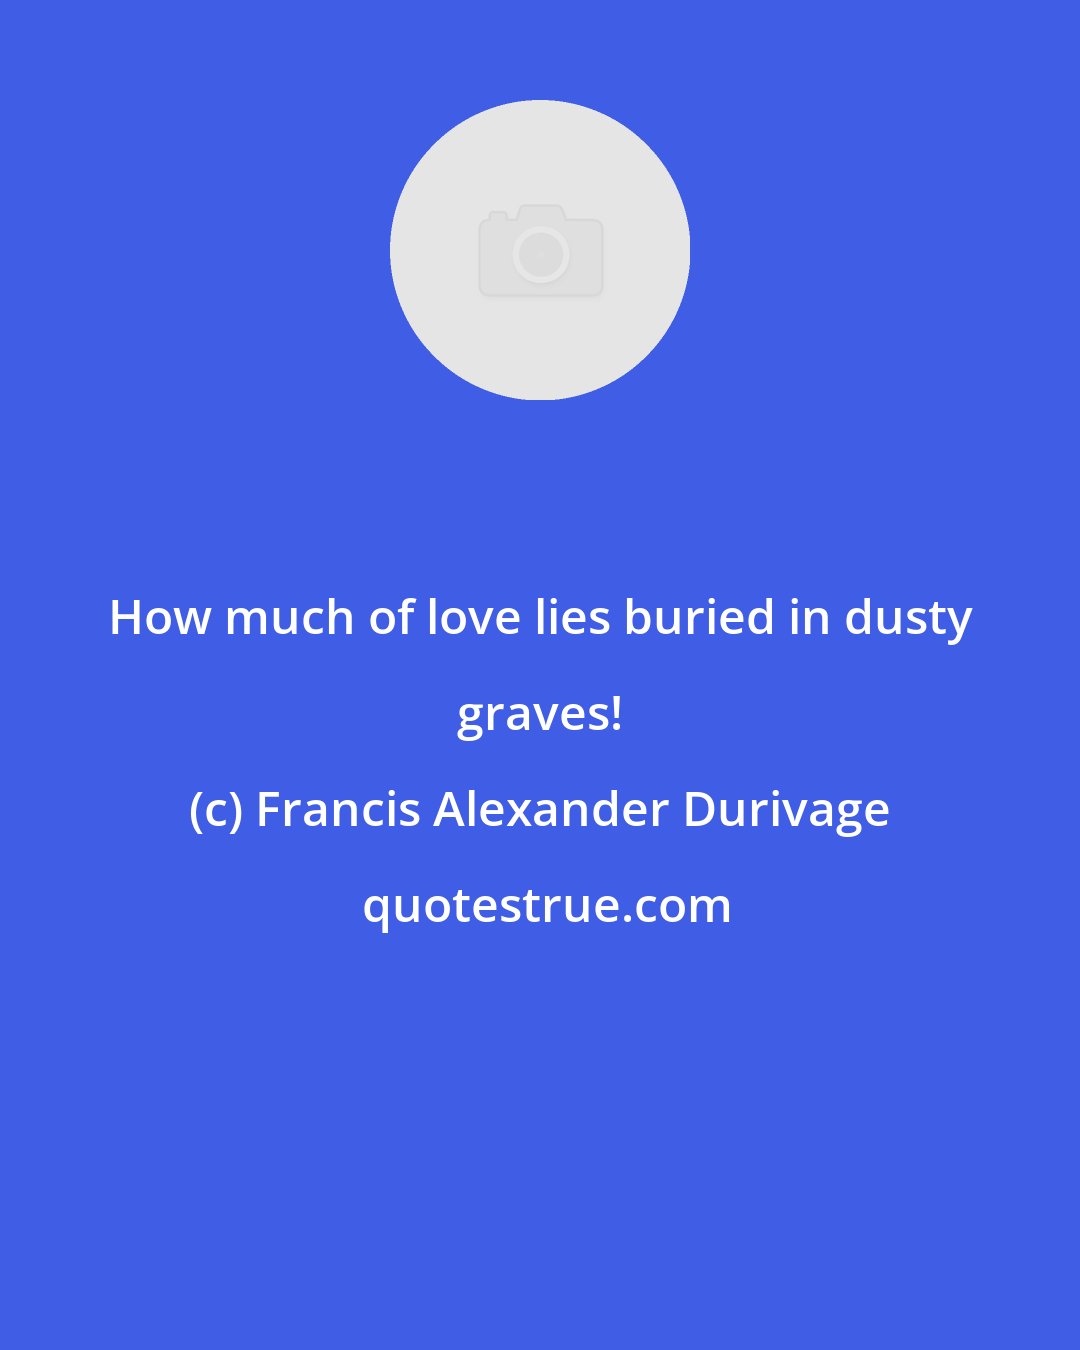 Francis Alexander Durivage: How much of love lies buried in dusty graves!